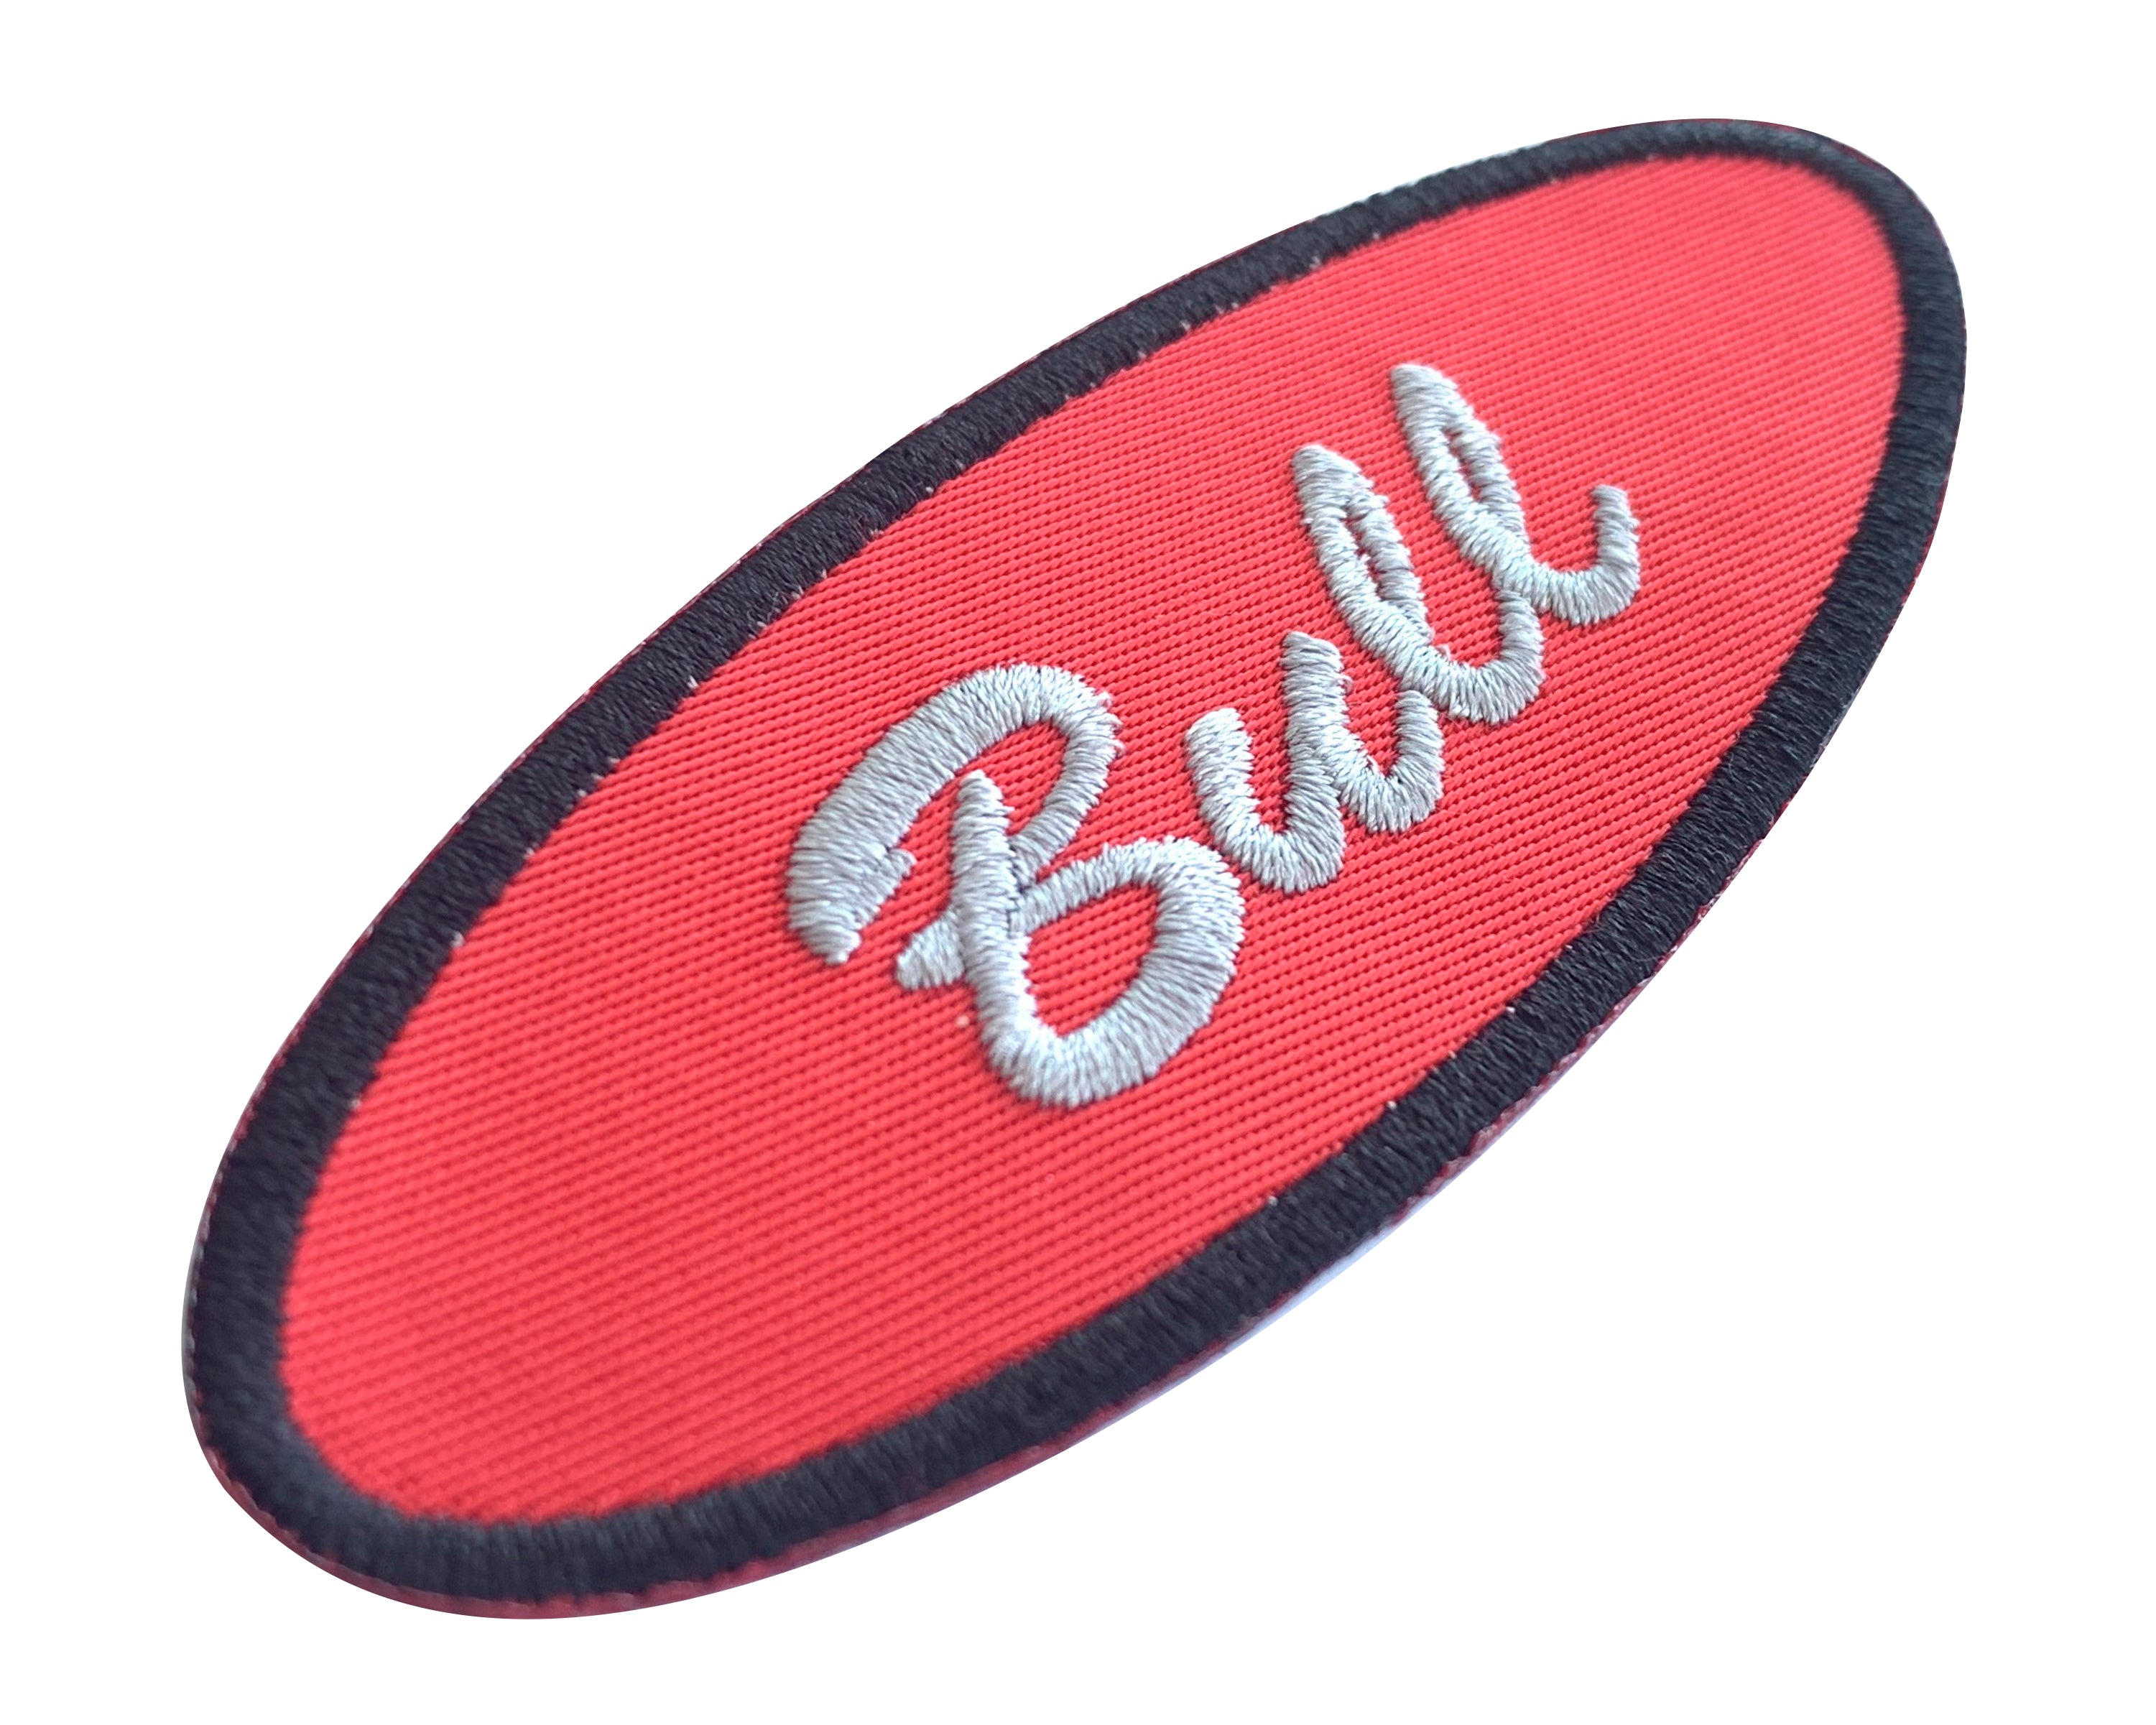 1.5 X 4 Personalized Oval Name Patch - Iron on or with VELCRO